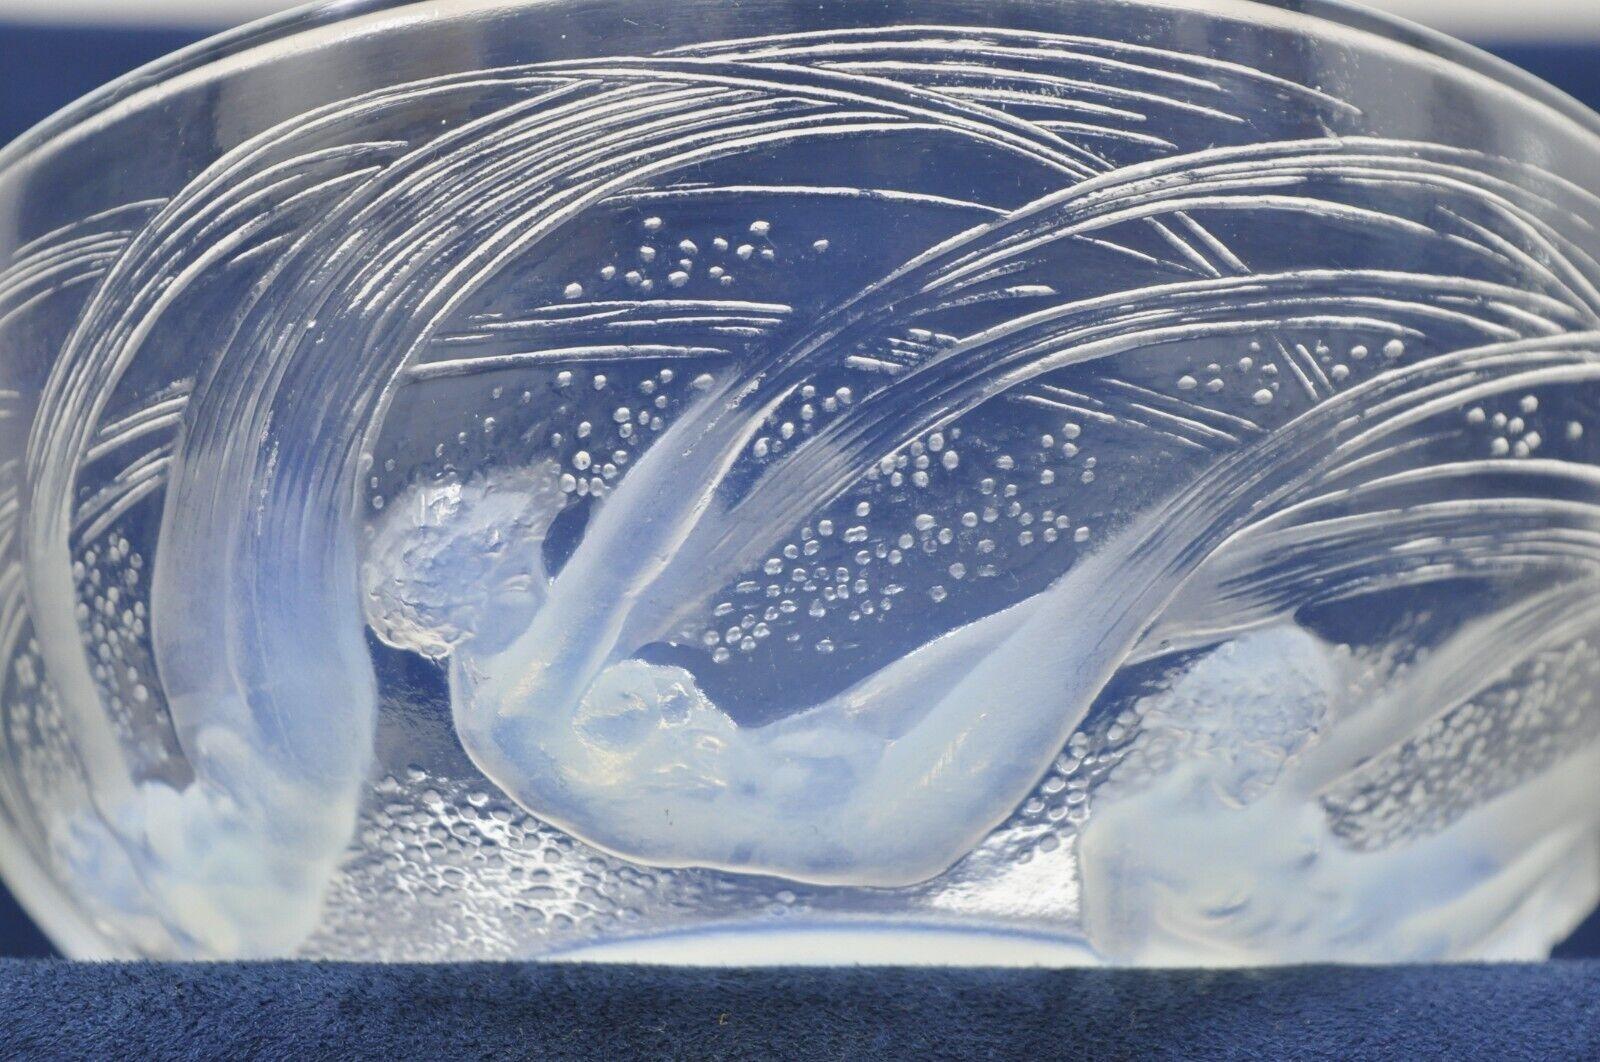 Original René Lalique Ondines Opalescent Clear Glass Swimming Mermaids French Bowl.
Item features signed 